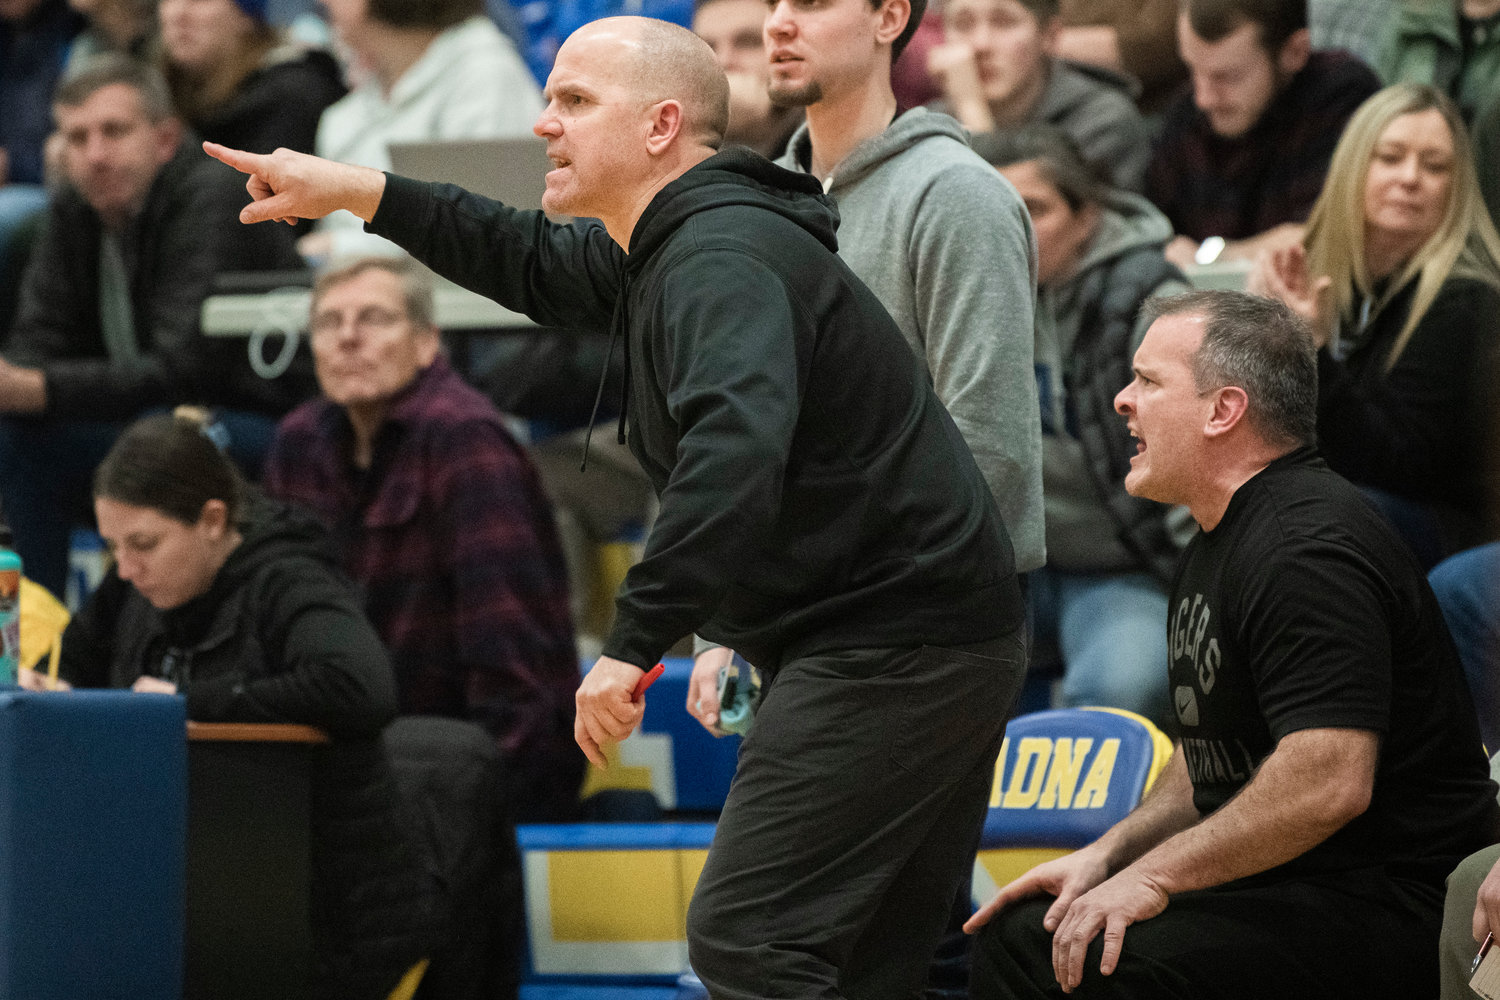 Napavine Head Coach Rex Stanley yells to athletes on the court during a game against Adna on Thursday.